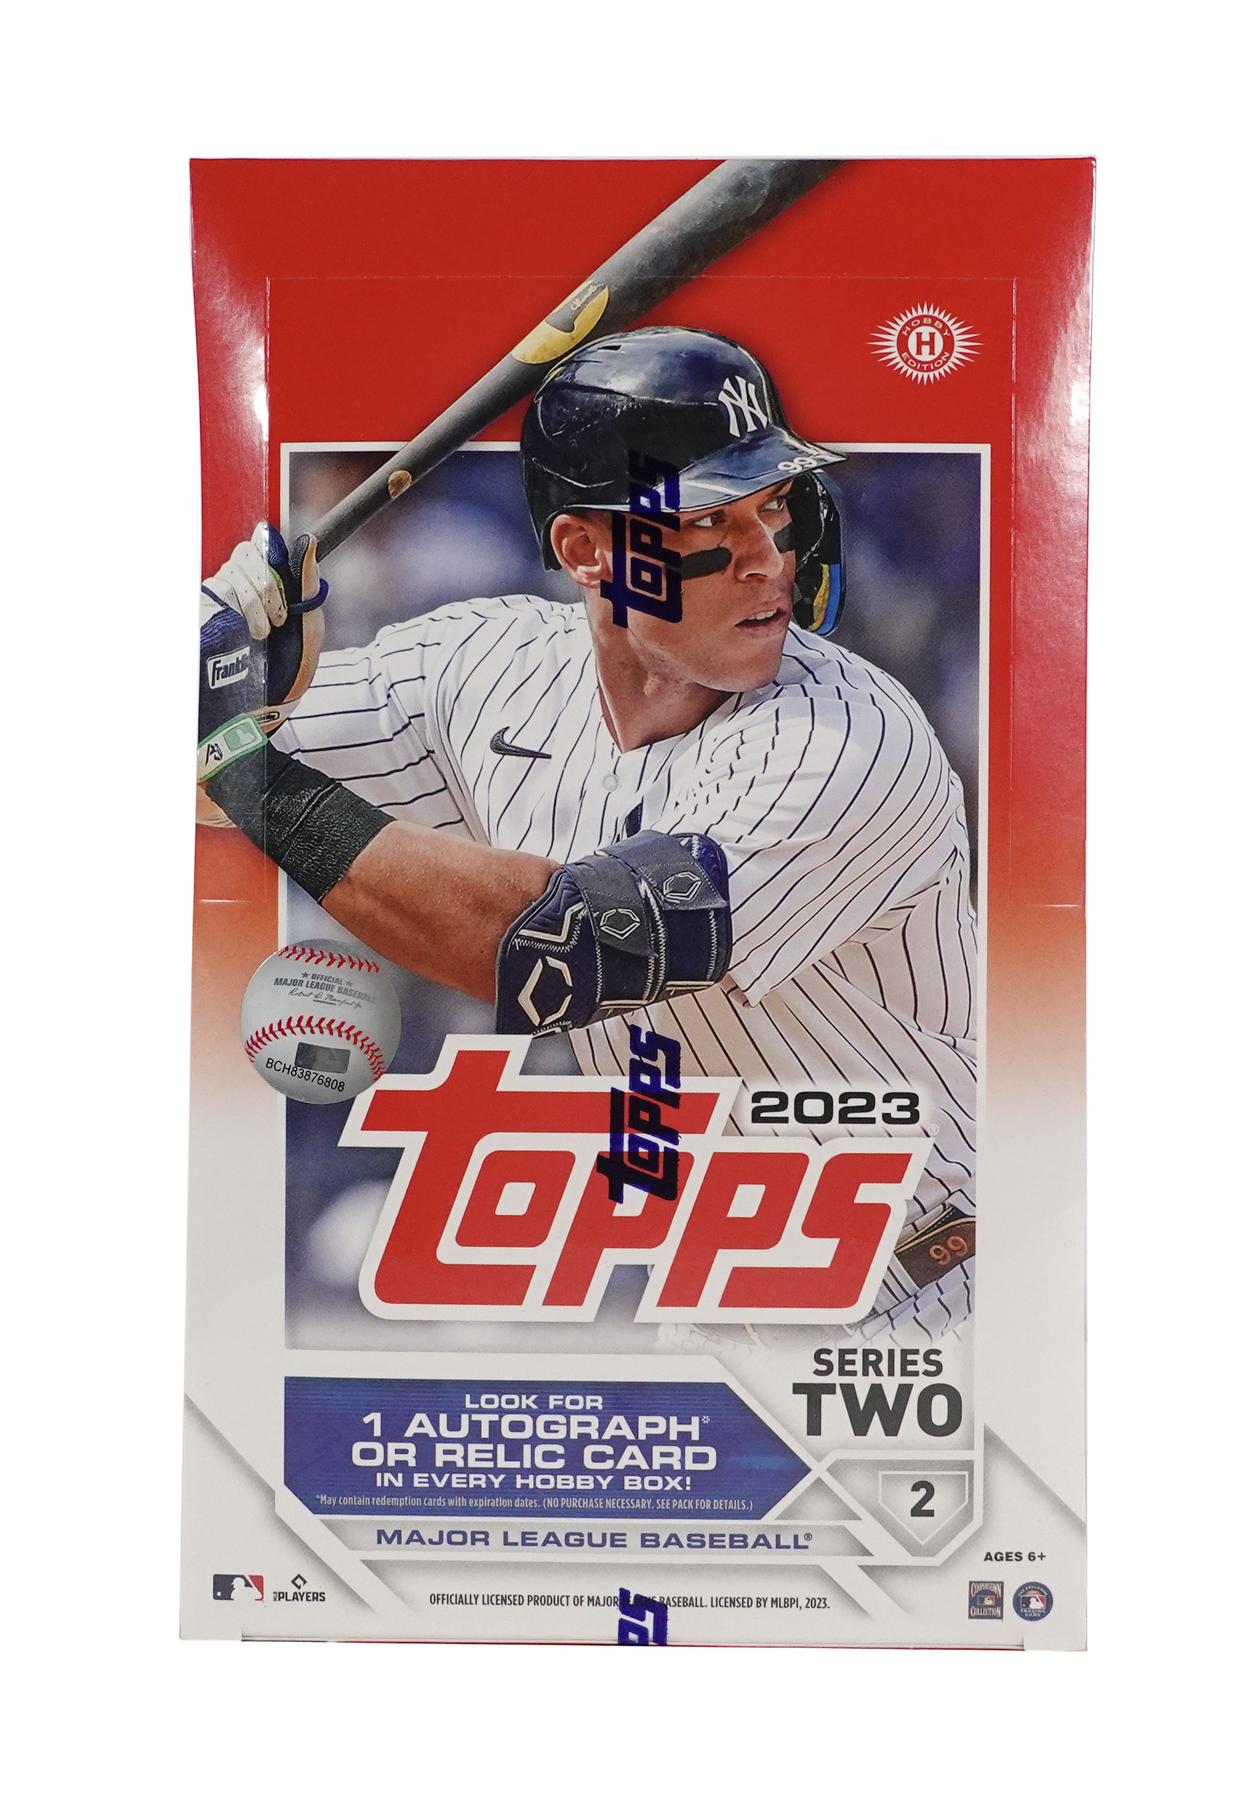 2023 topps series 1 and 2 st louis cardinals team set baseball cards